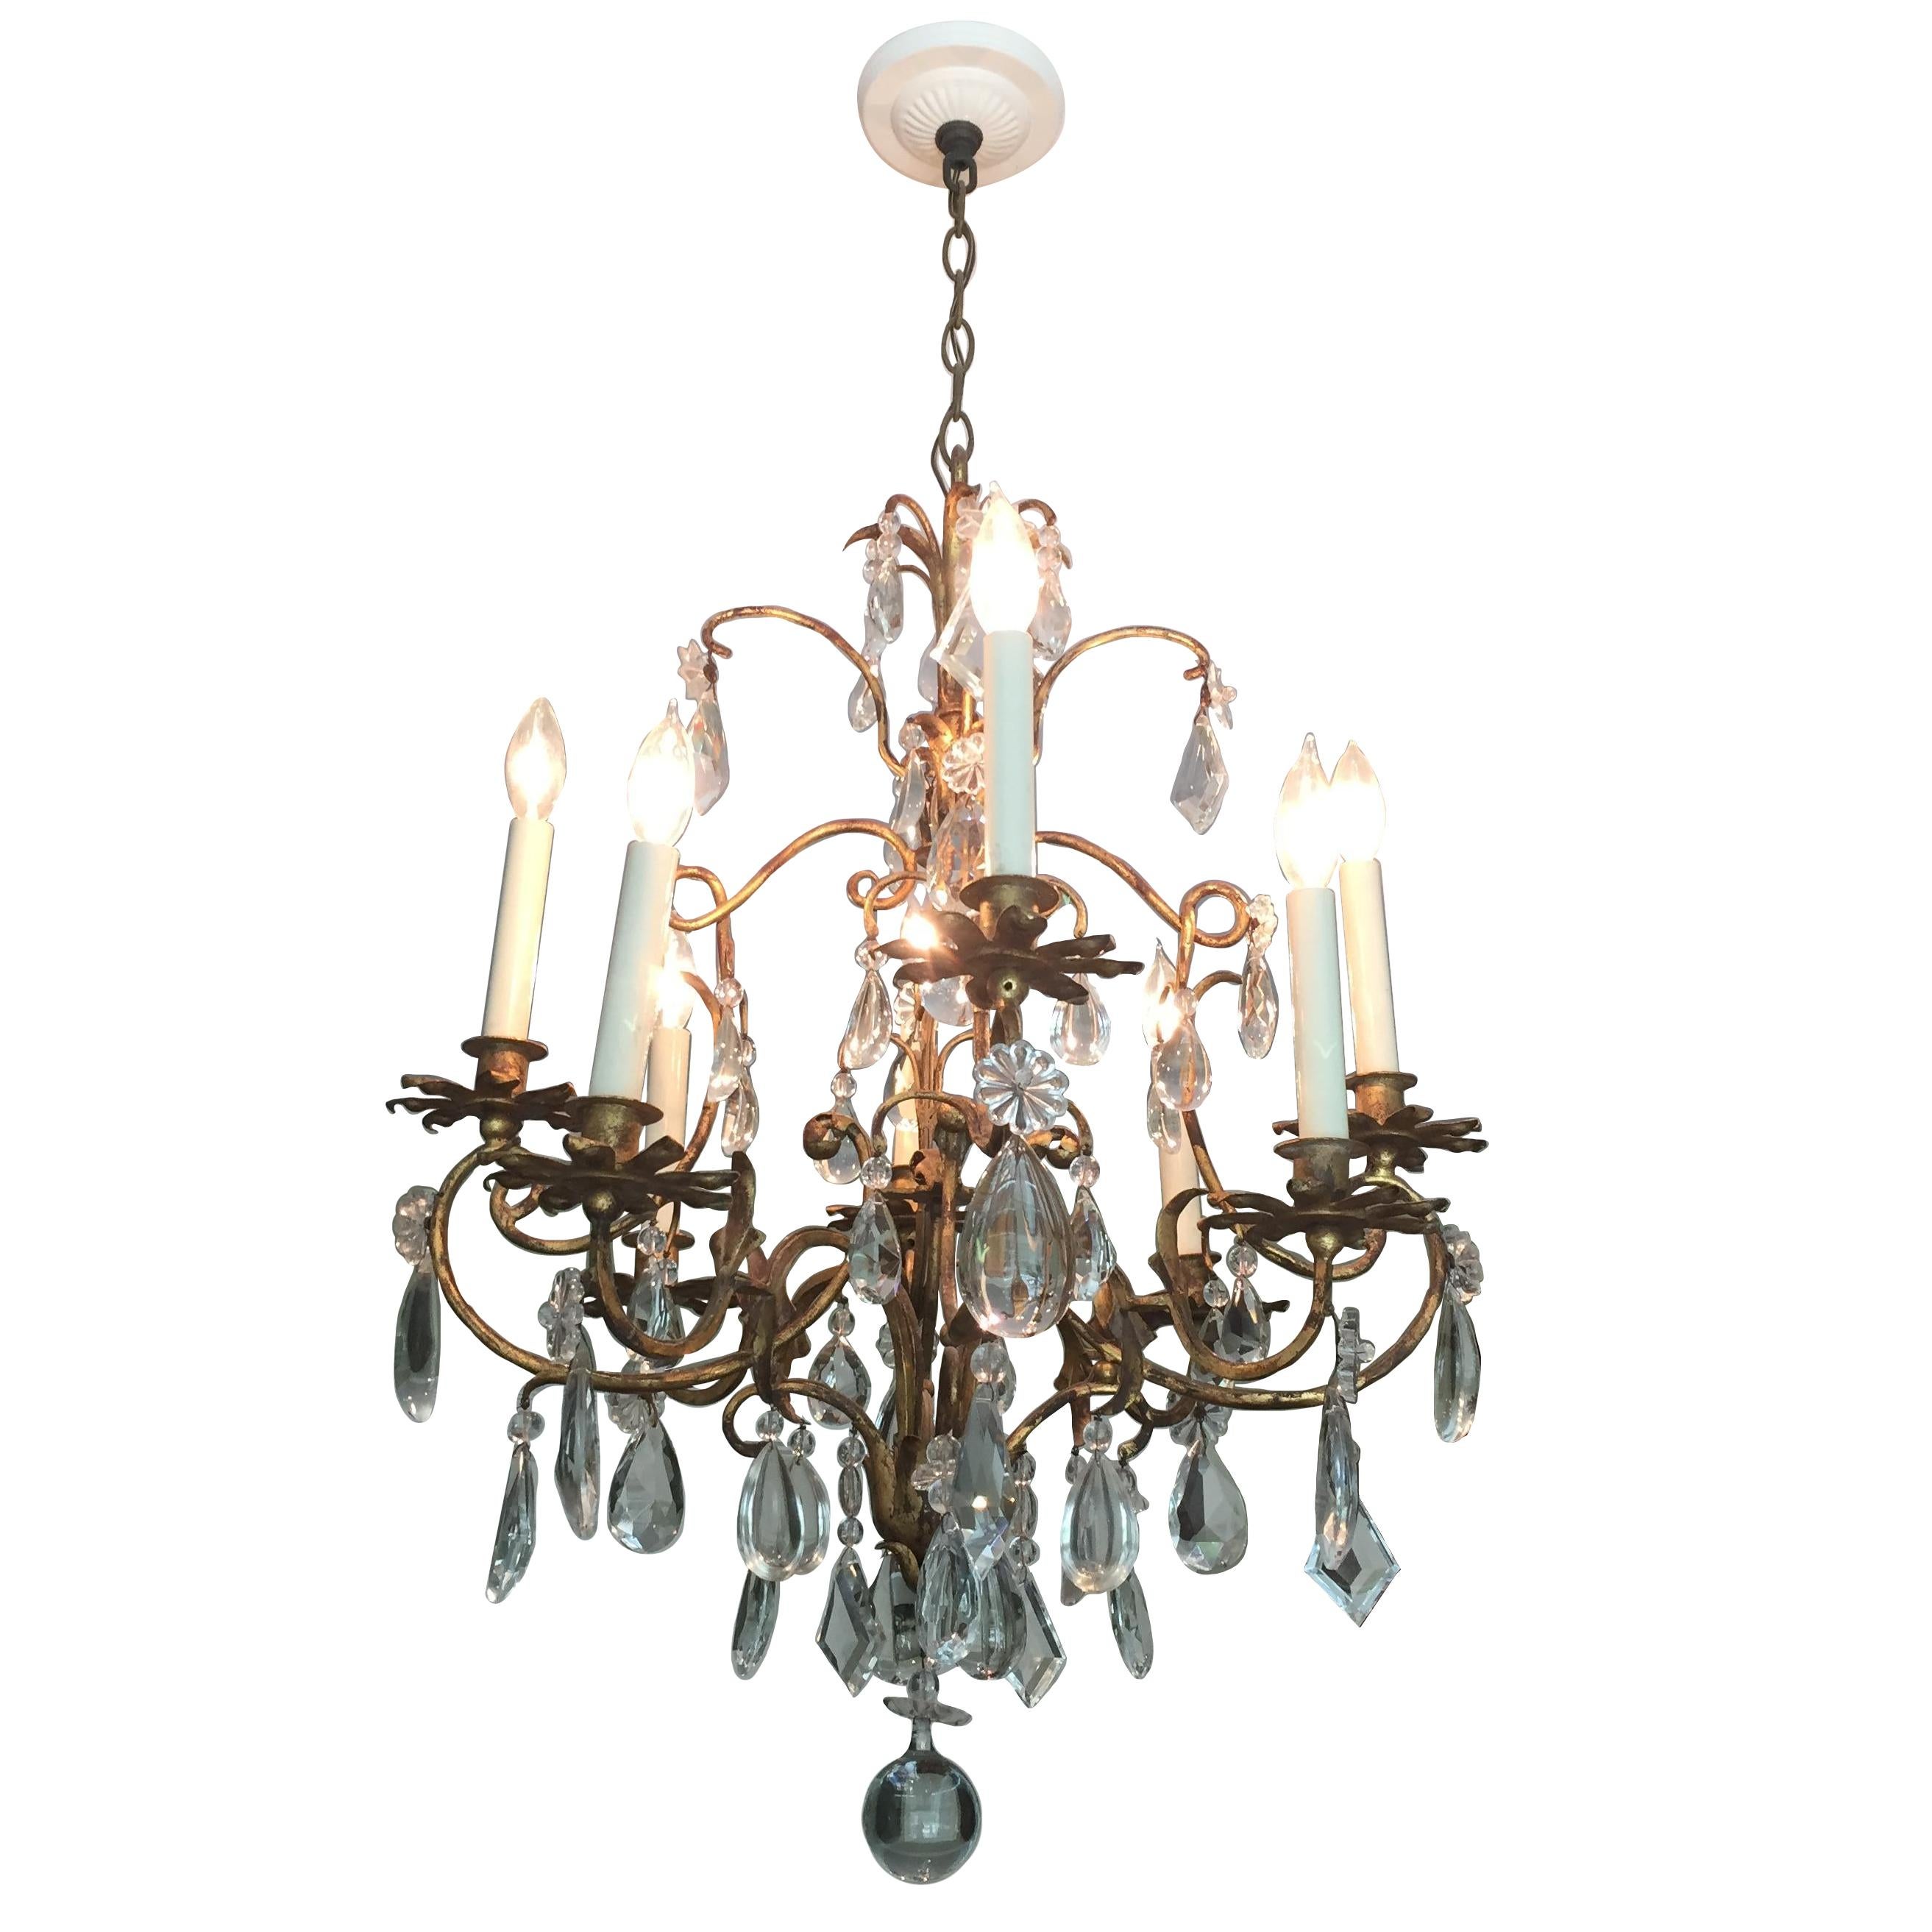 Mid-Century Italian Iron and Crystal Midcentury Eight-Armed Chandelier For Sale